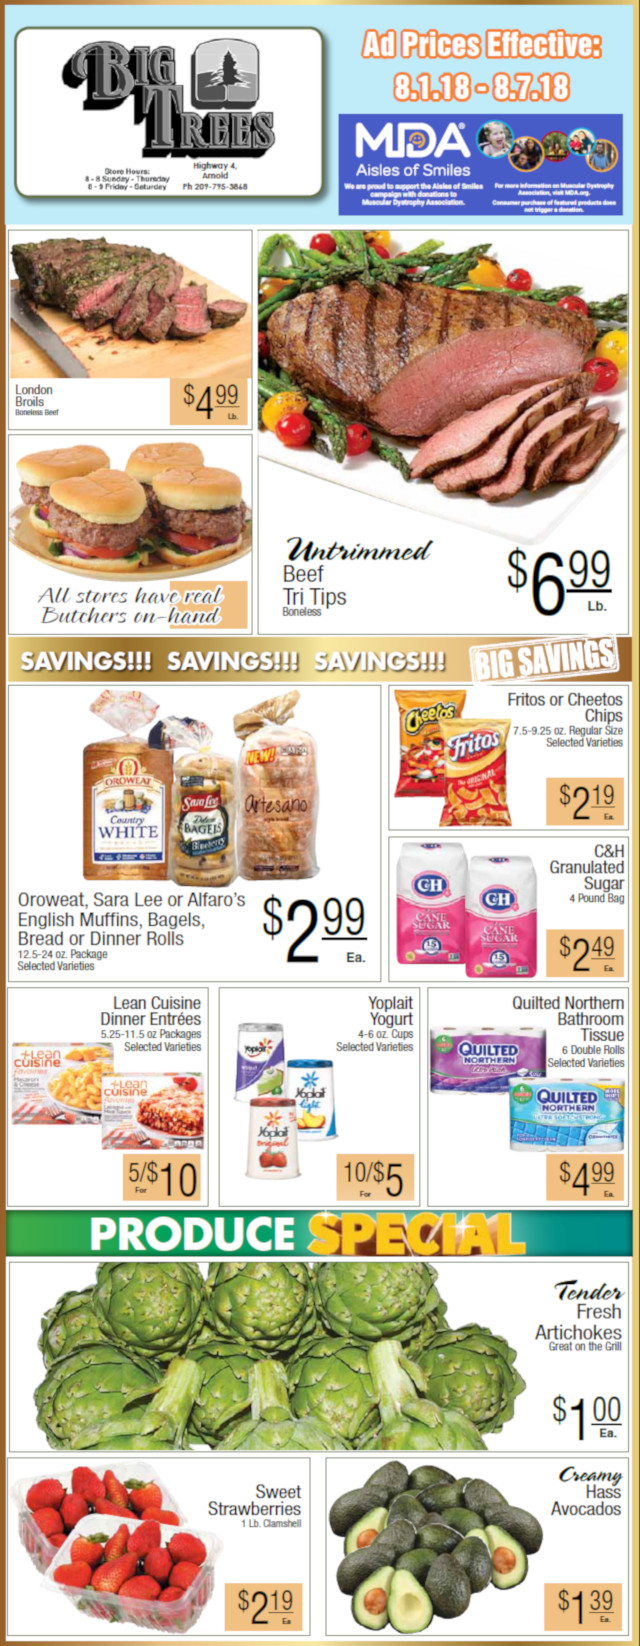 Big Trees Market Weekly Ad & Grocery Specials Through August 7th